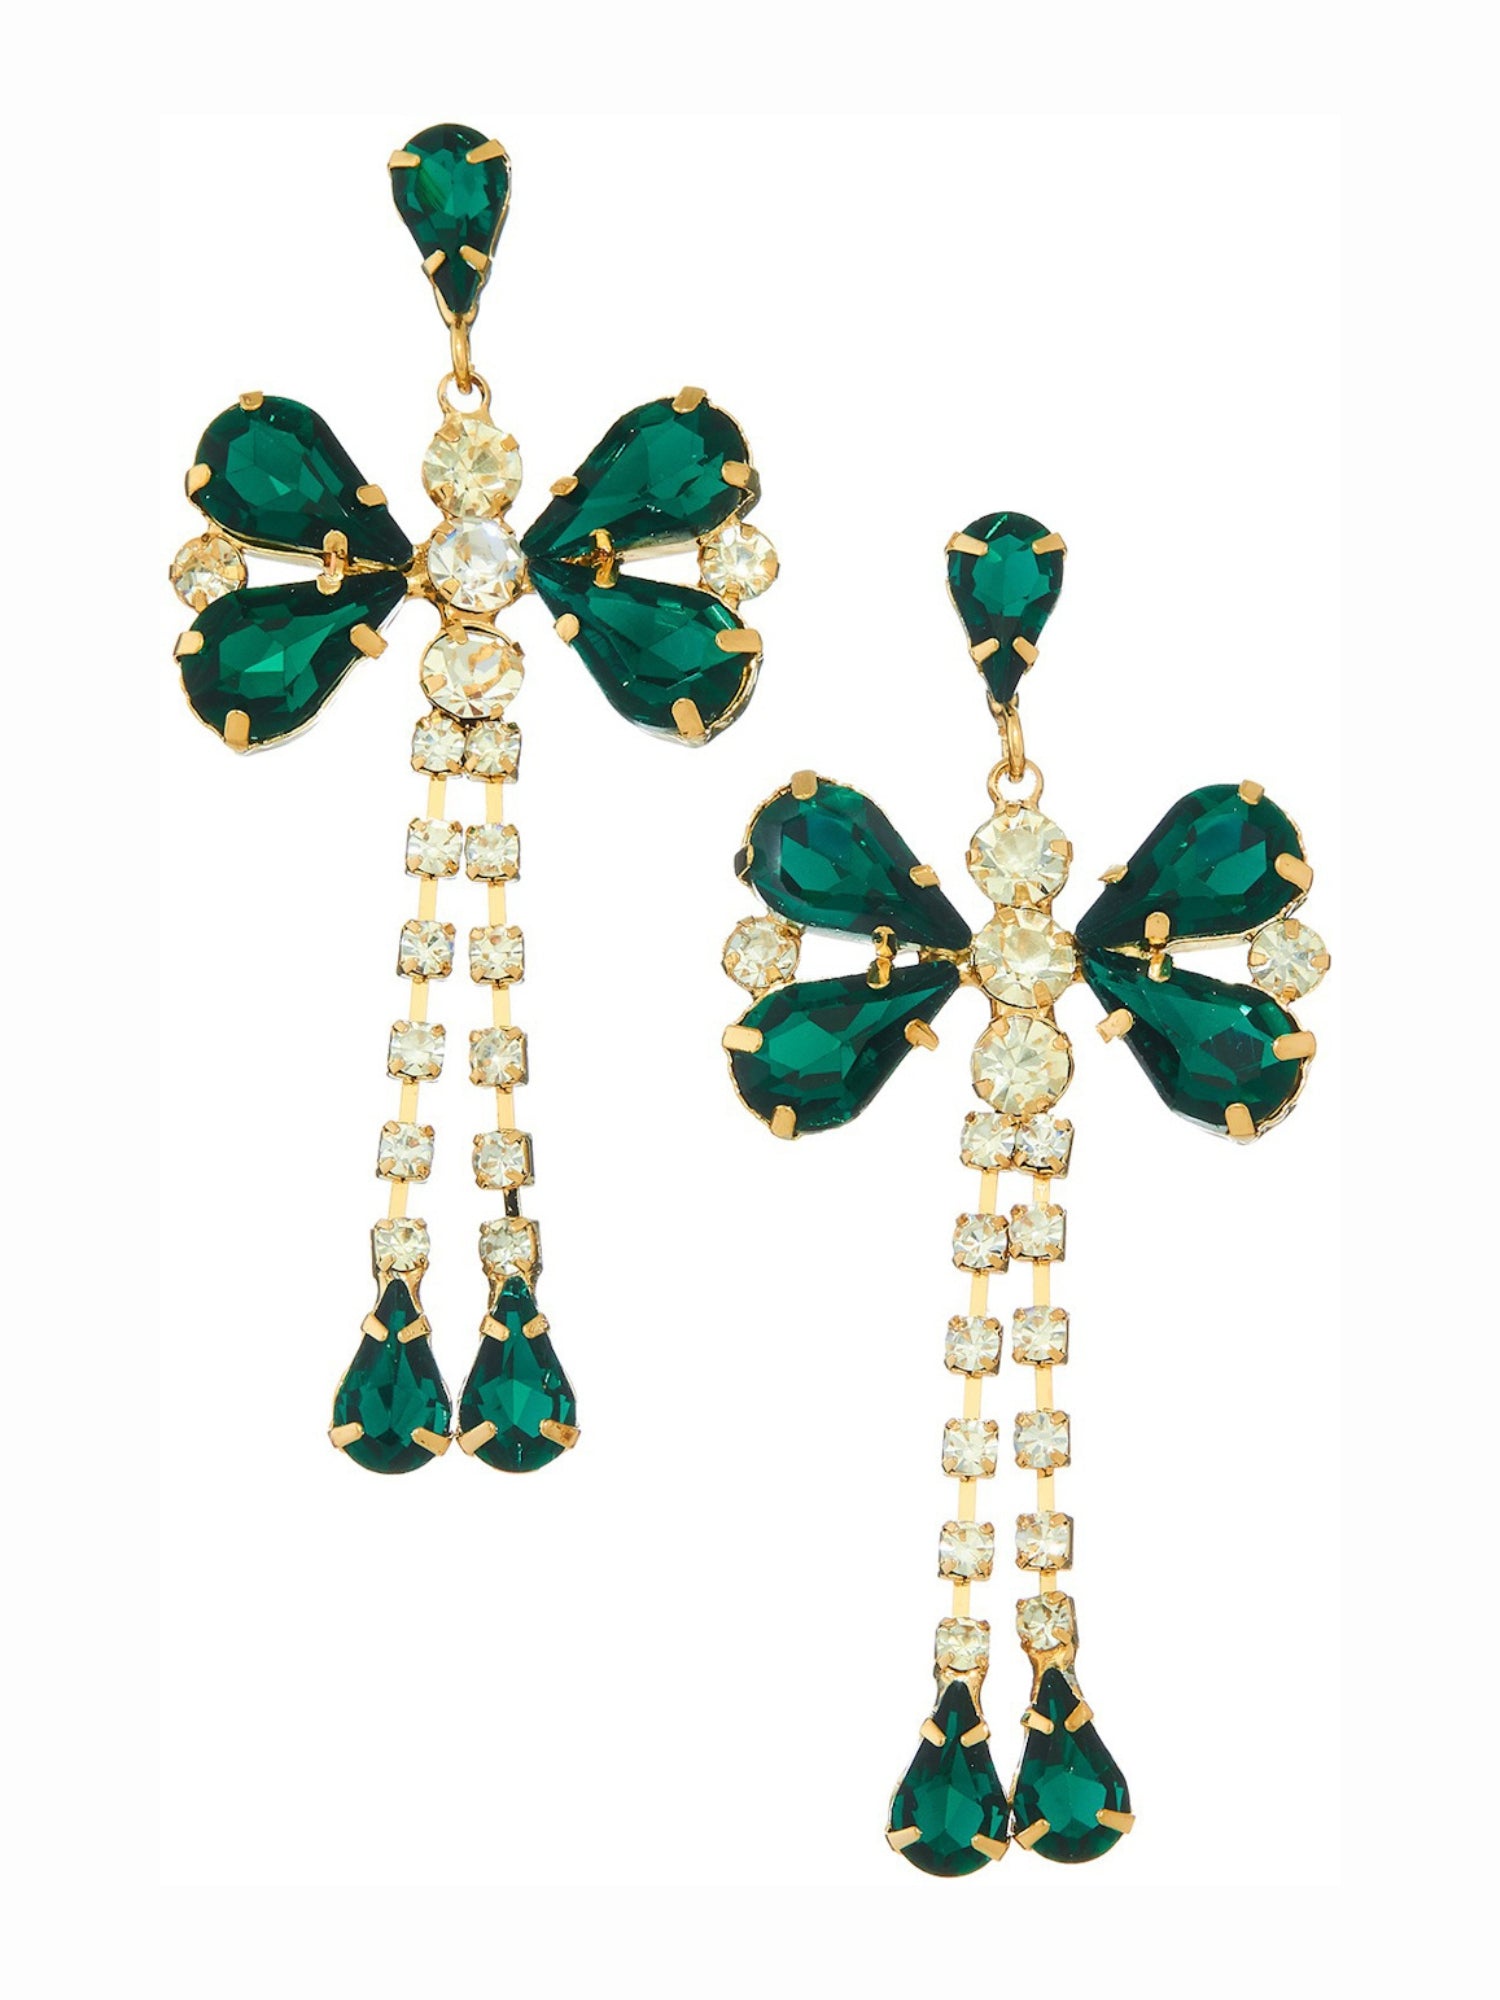 The Emerald Dragonfly Earrings, Earrings, ISC - Ivory Sheep Collection Limited